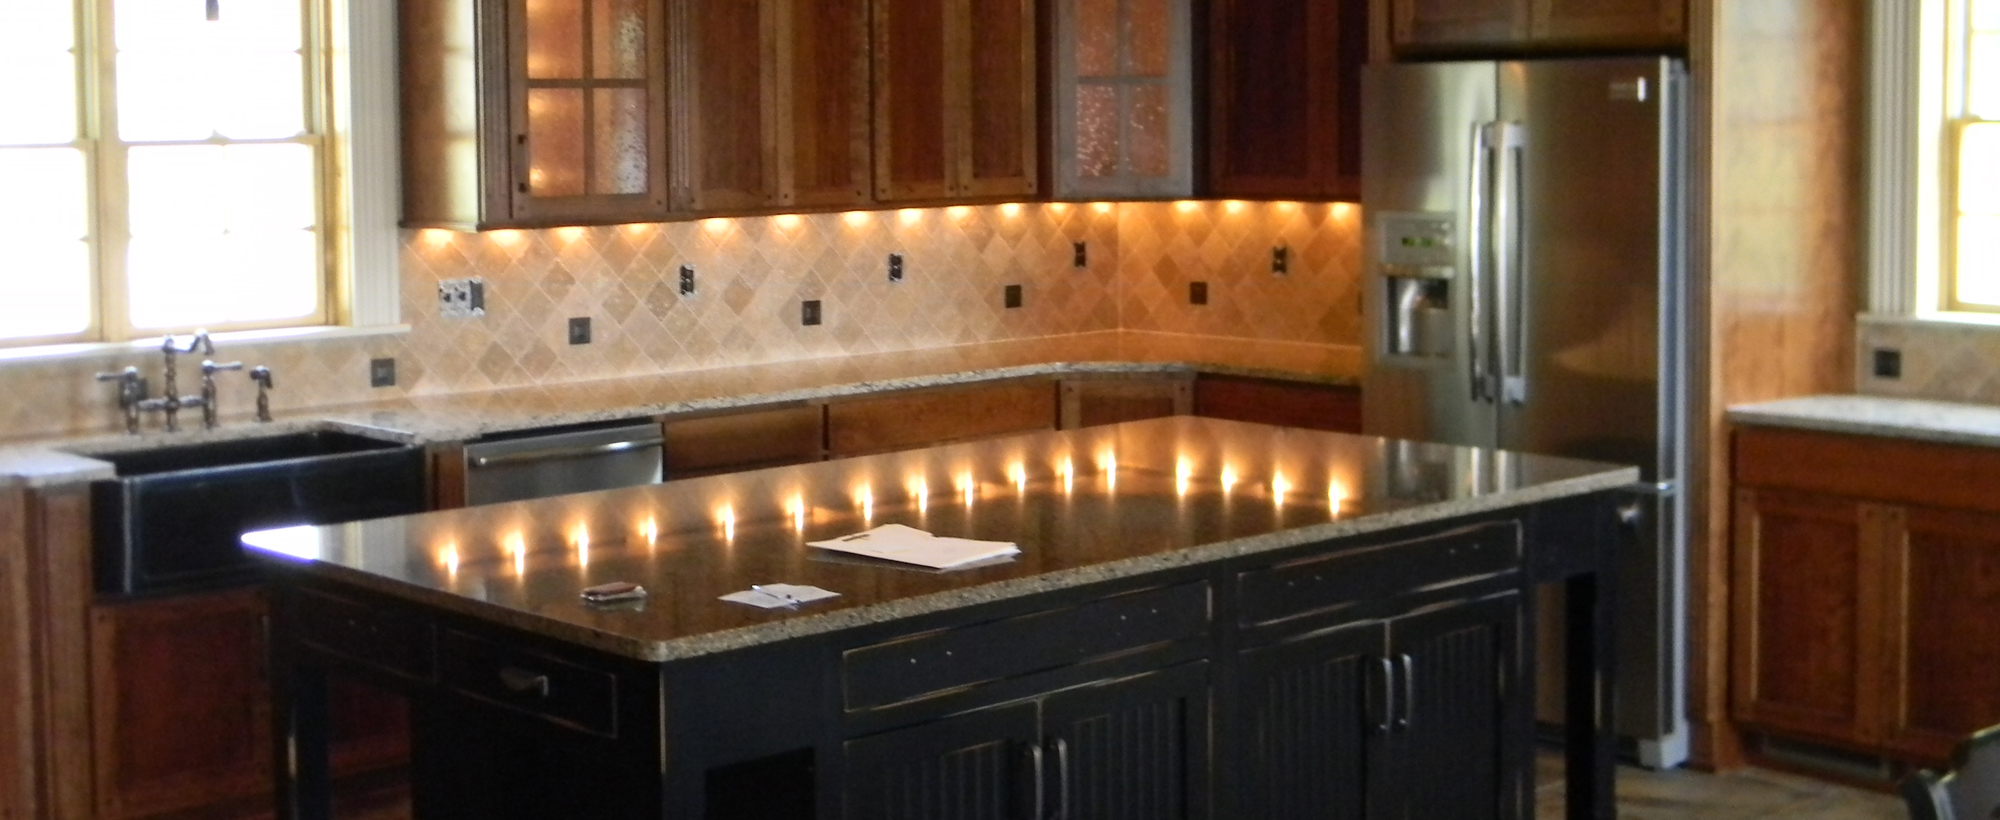 Custom Cabinetry by Superior Floorcoverings & Kitchens